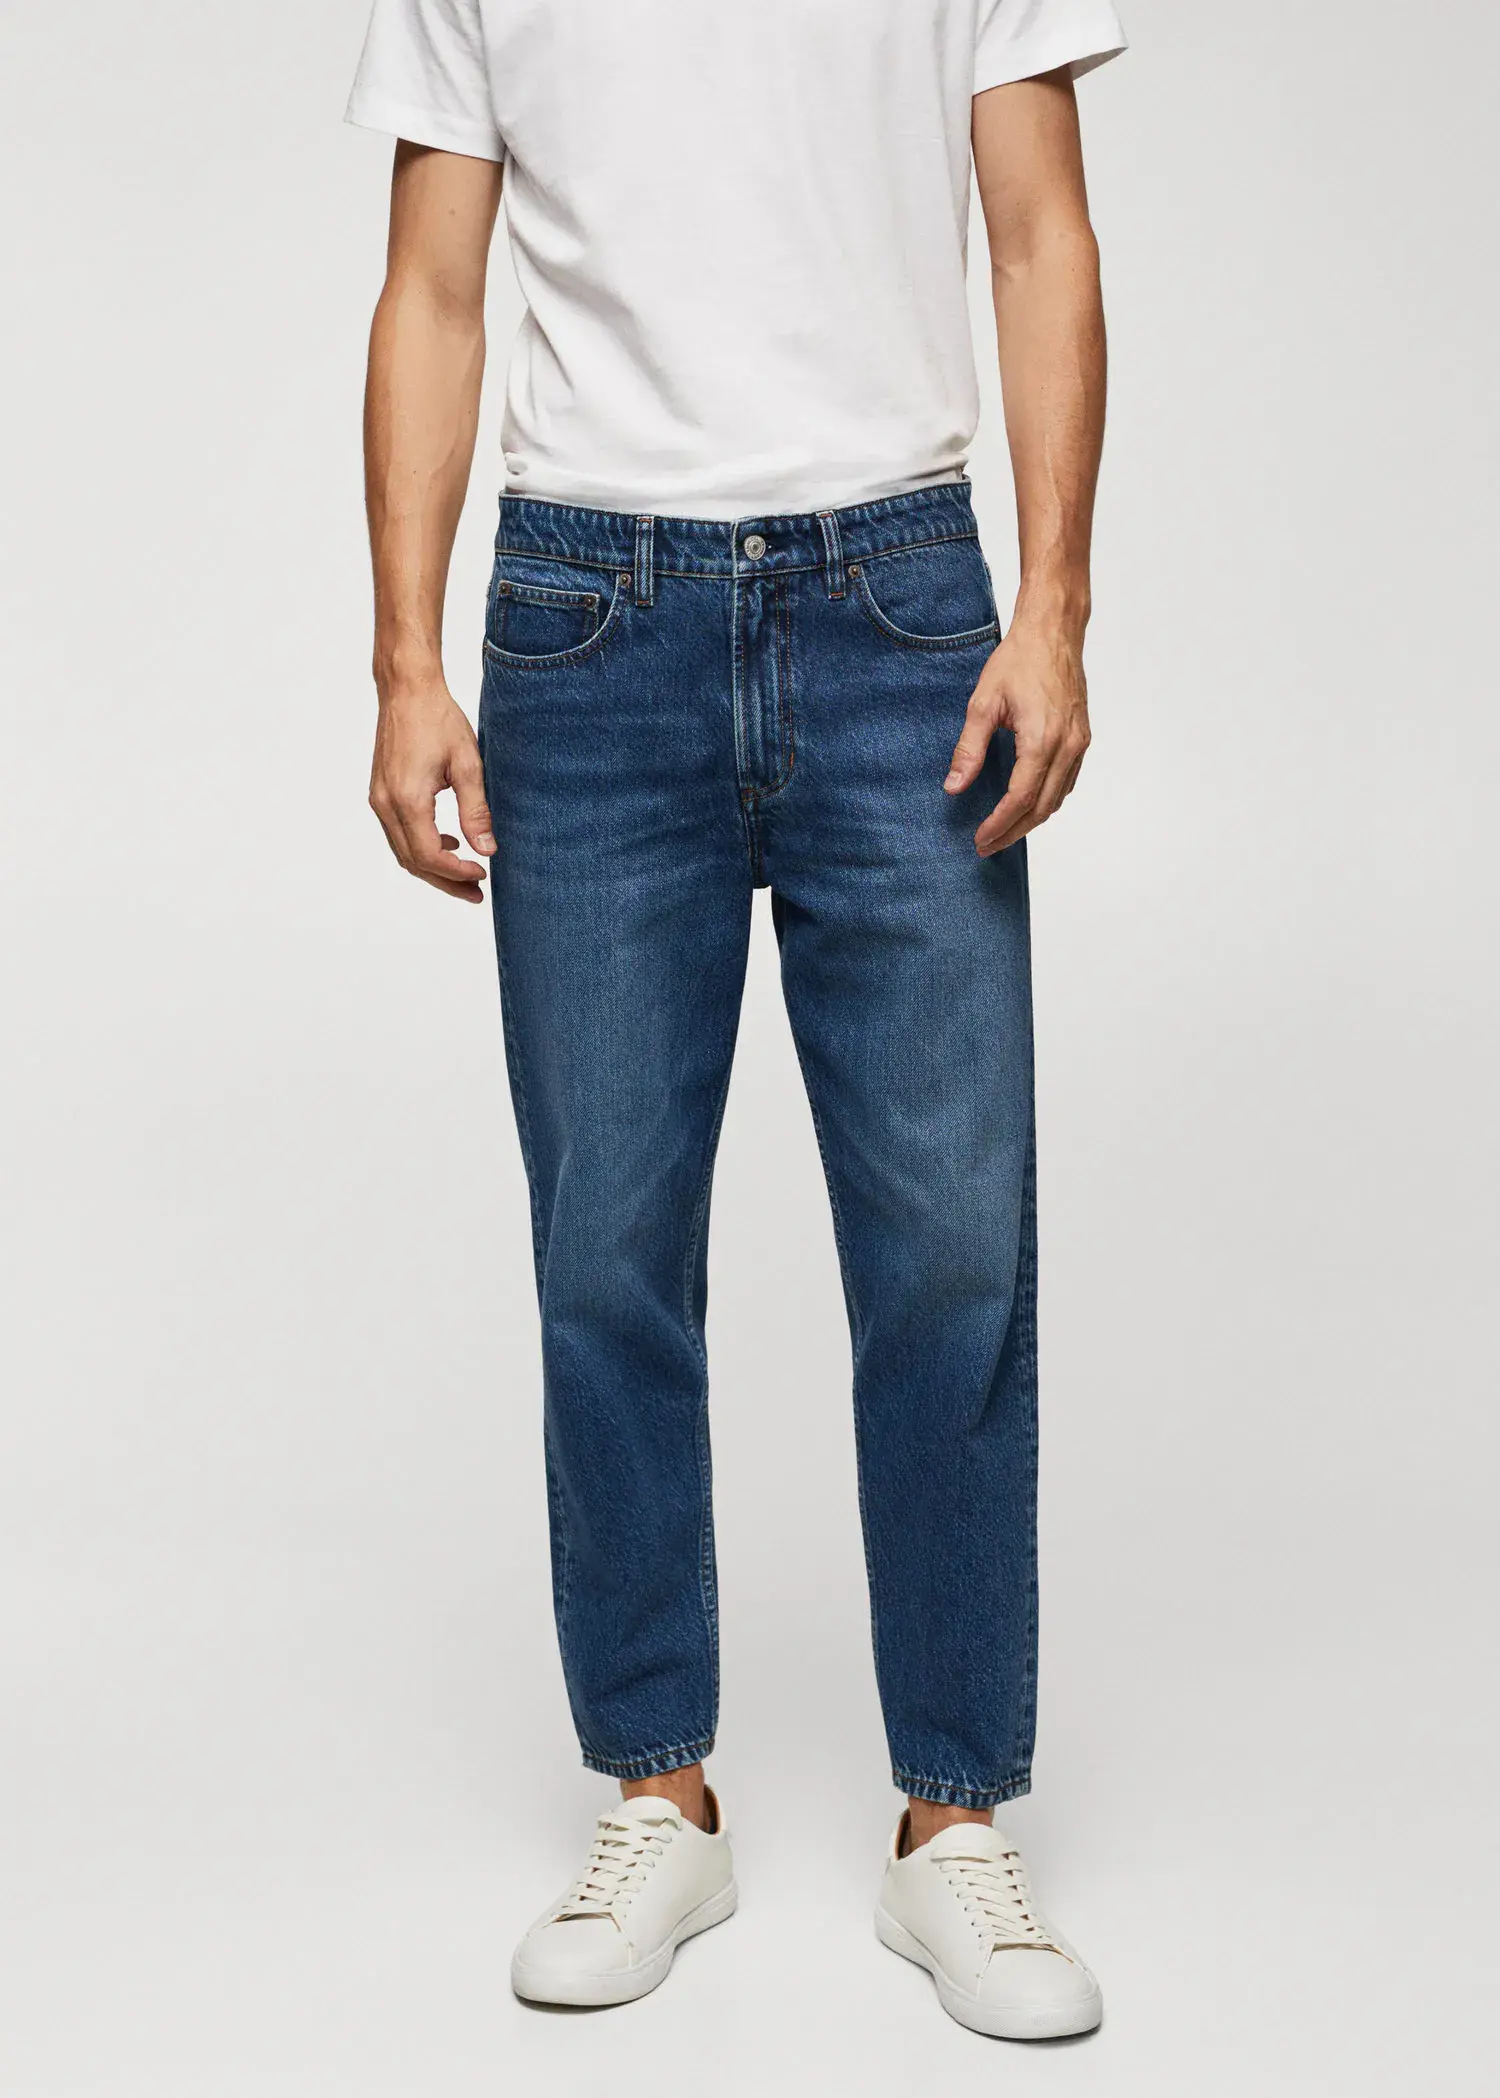 Mango Tapered Fit-Jeans mit dunkler Waschung. 2